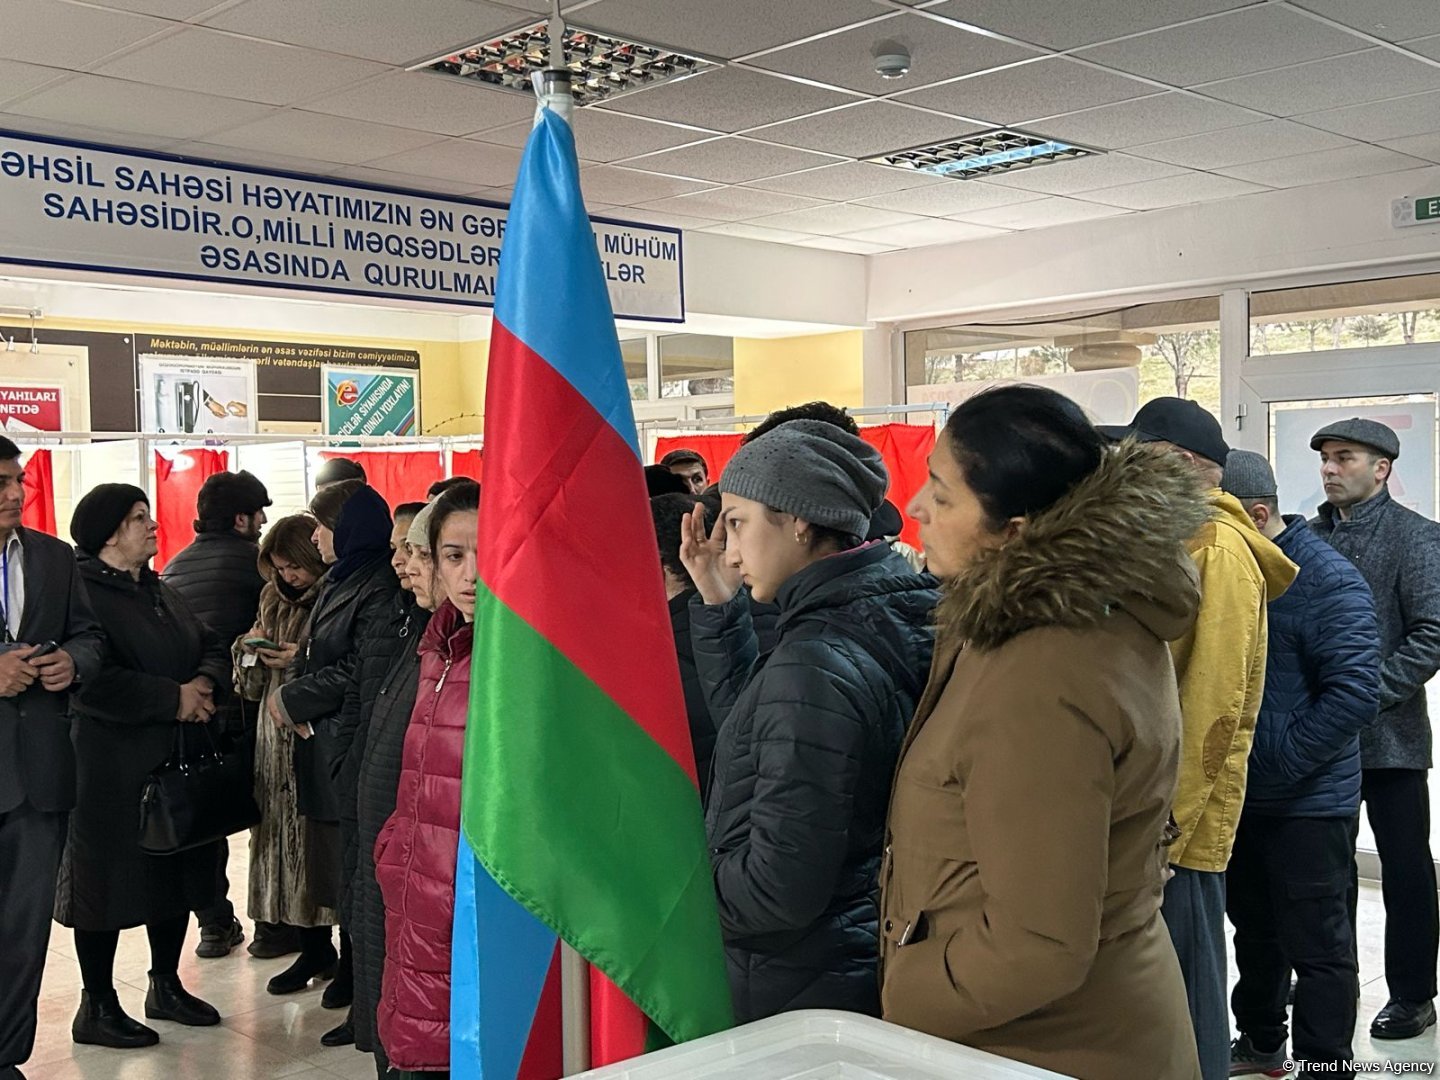 Azerbaijan's Surakhani district sees influx of voters to polling stations (PHOTO)